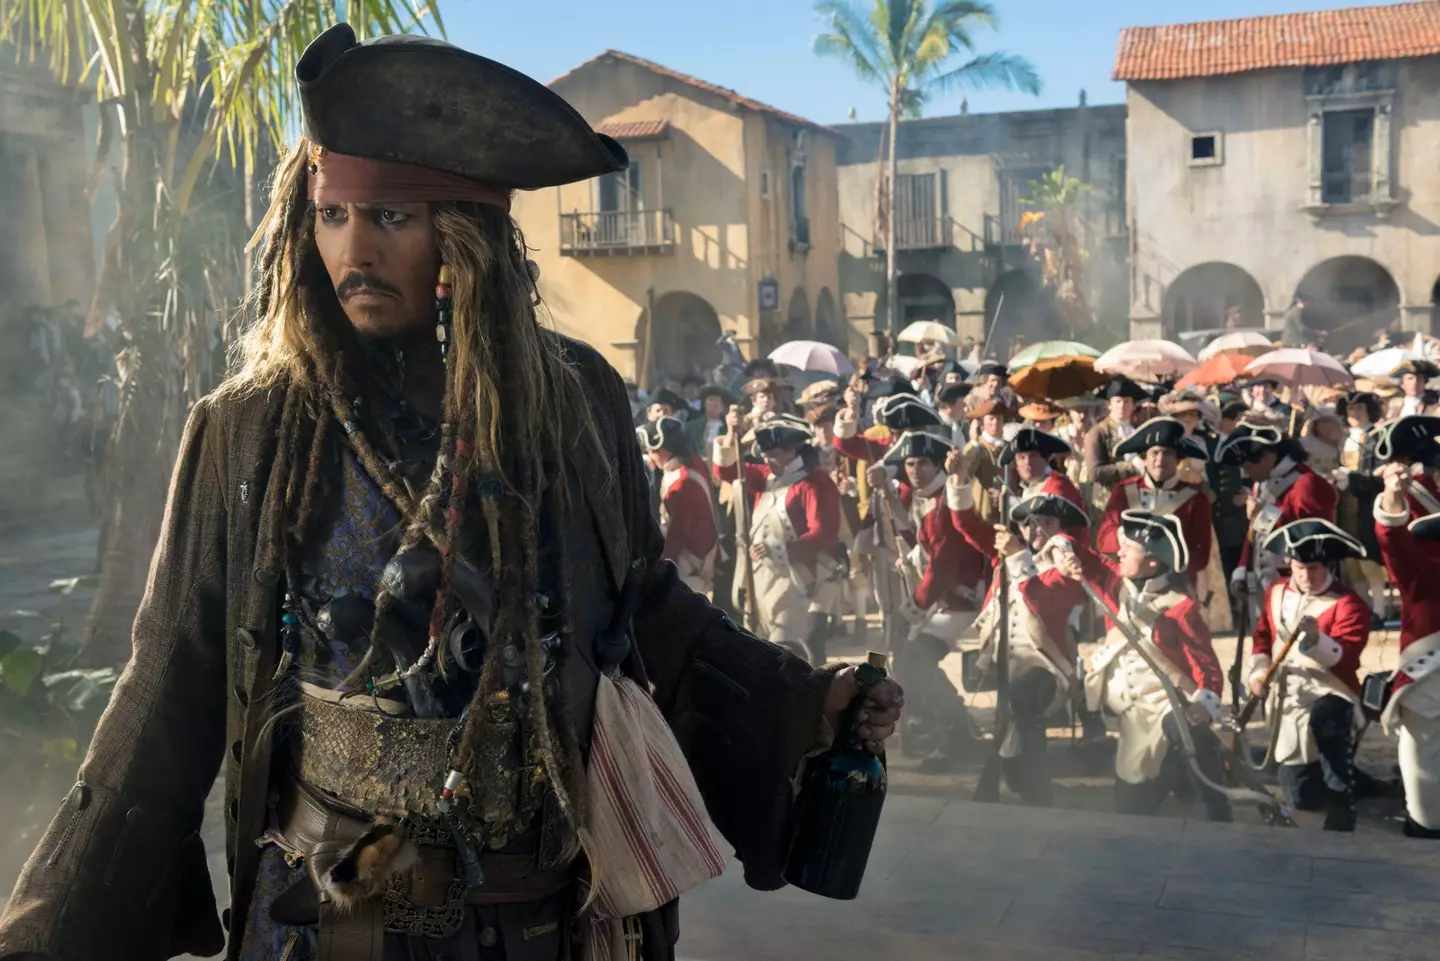 Johnny Depp as Captain Jack Sparrow in 2017's Pirates of the Caribbean: Dead Men Tell No Tales.